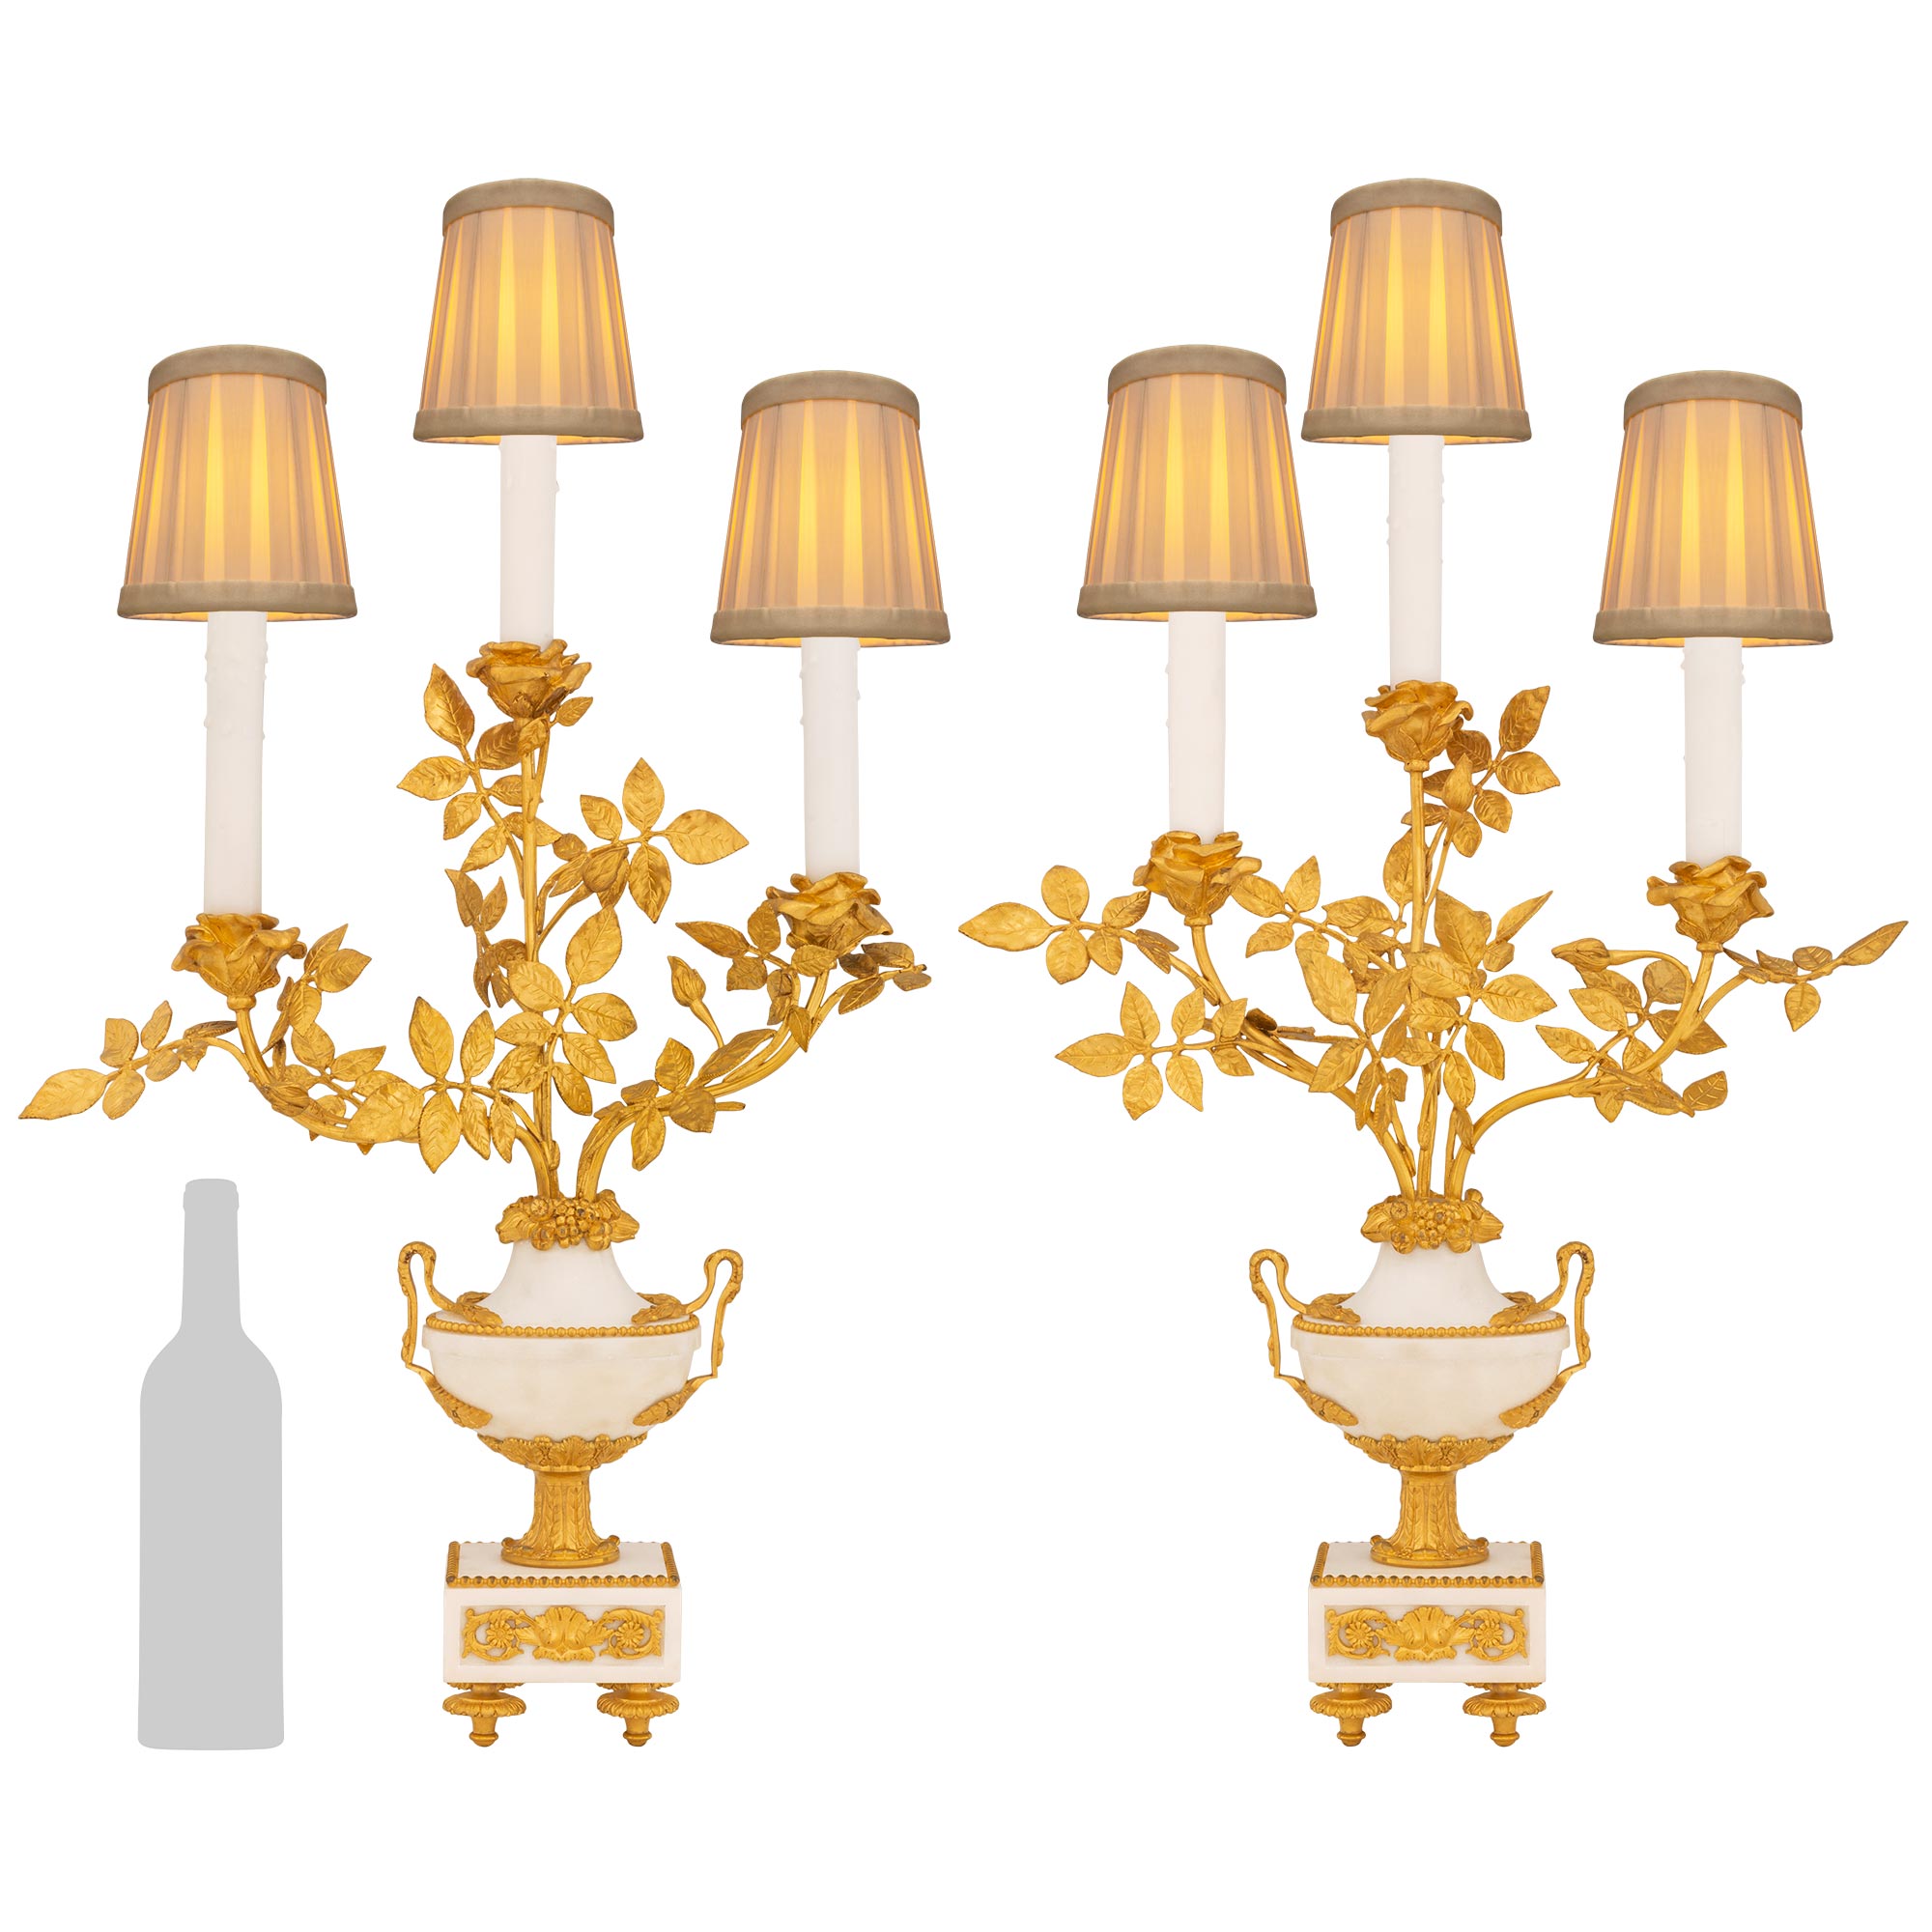 Pair of Mid 19th Century French Louis XVI St. Candelabras For Sale